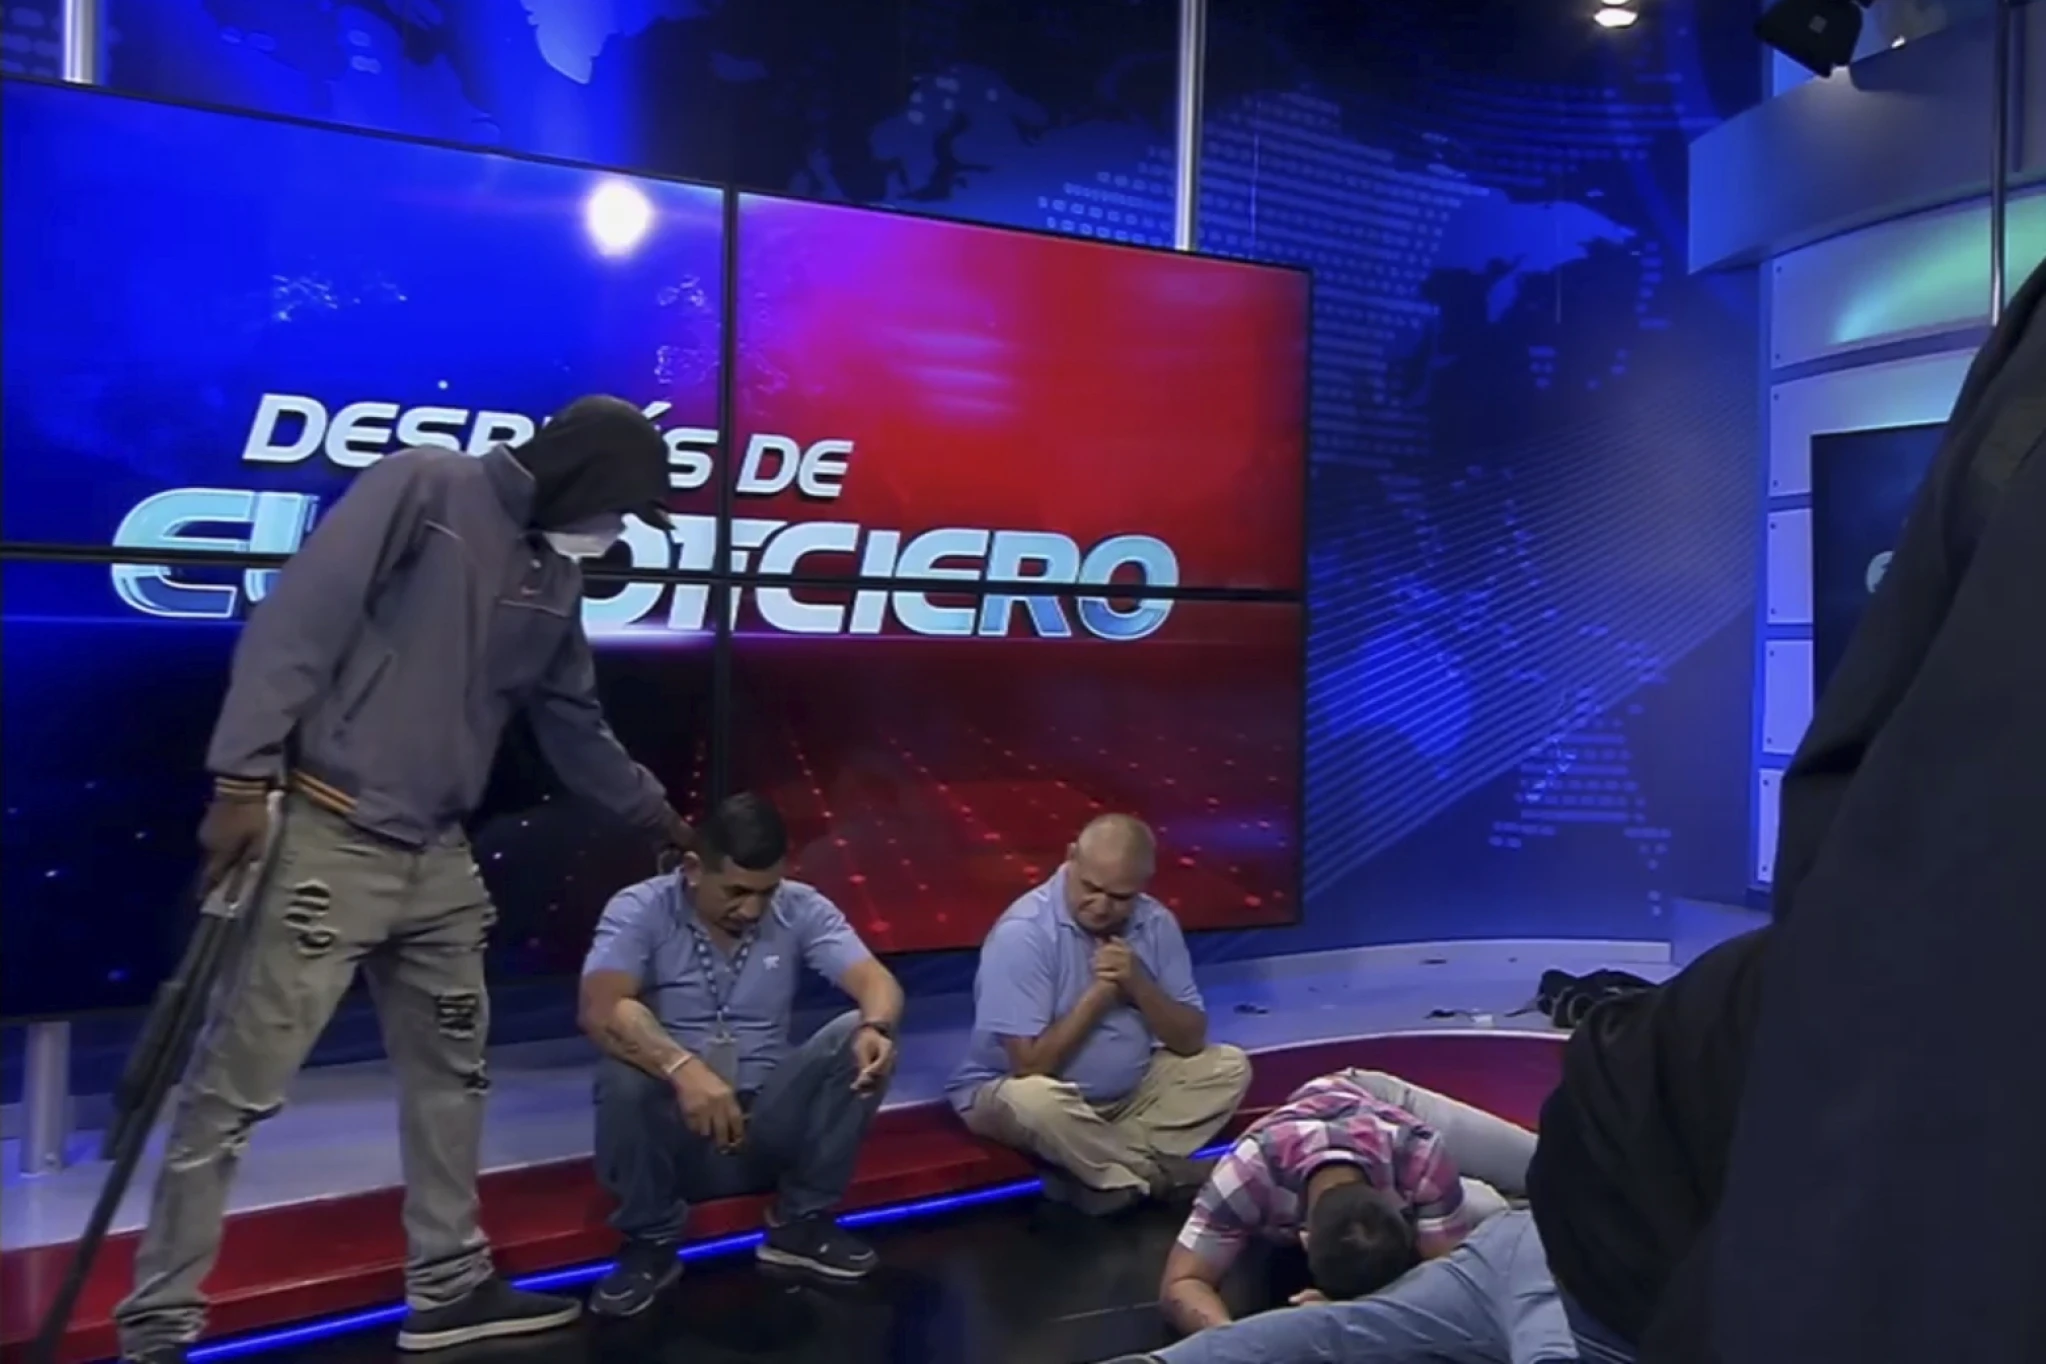 Armed men storm an Ecuador TV studio during a live broadcast as attacks in the country escalate